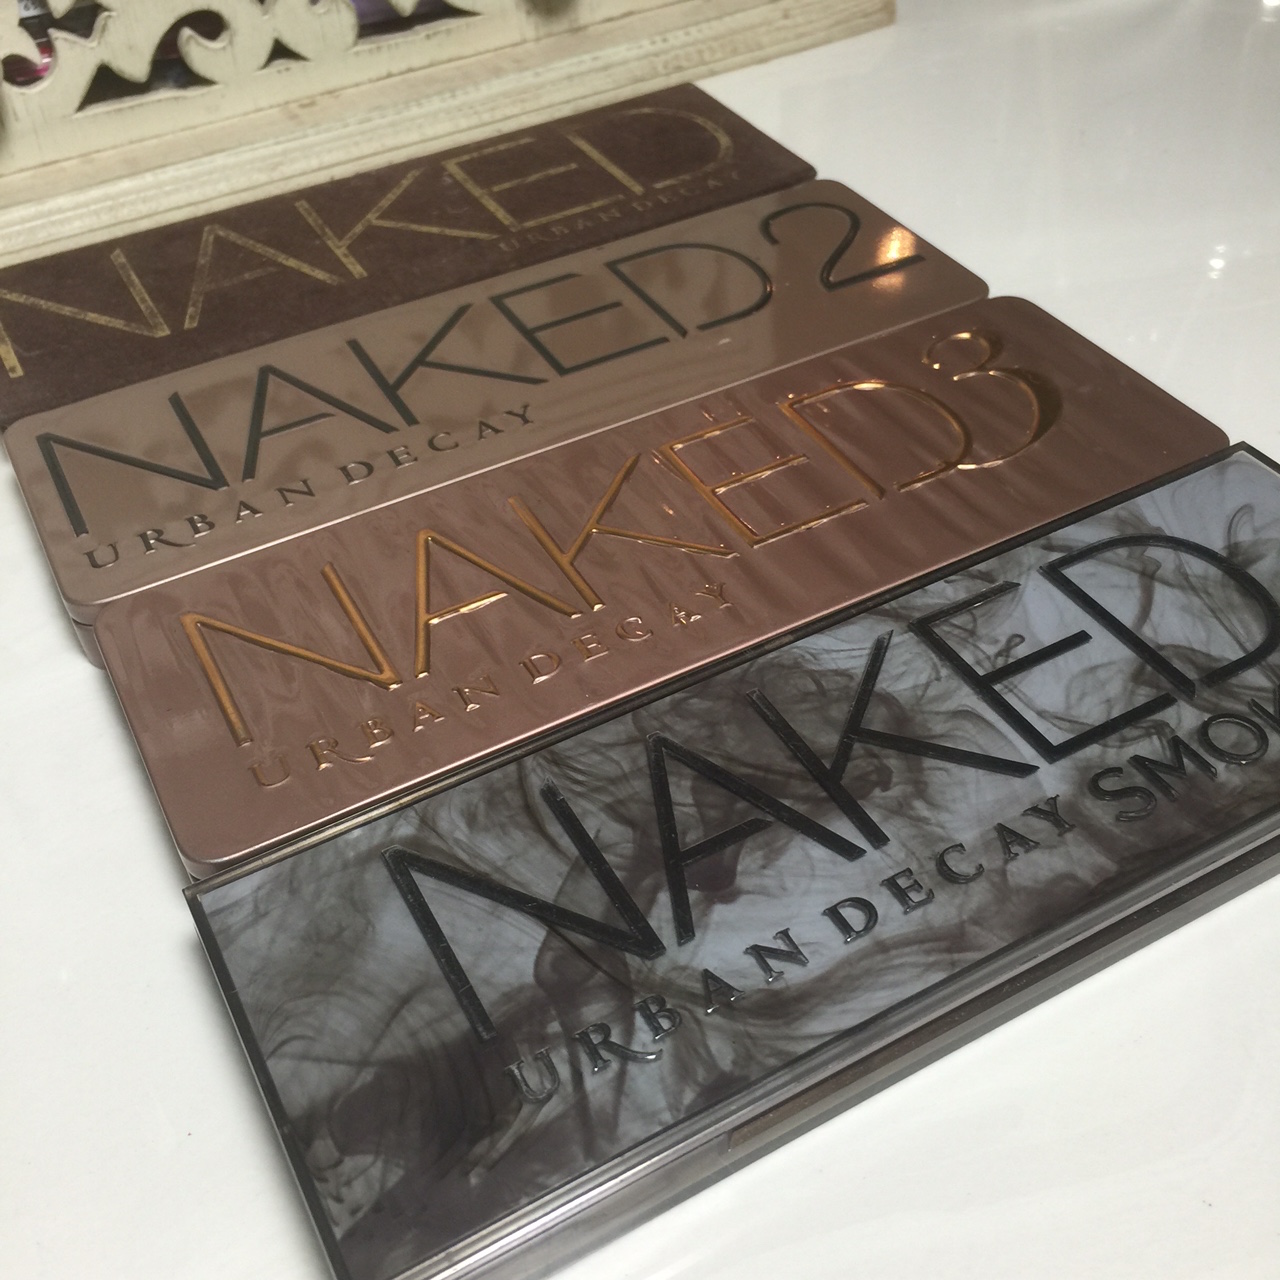 urban_decay_naked_palettes